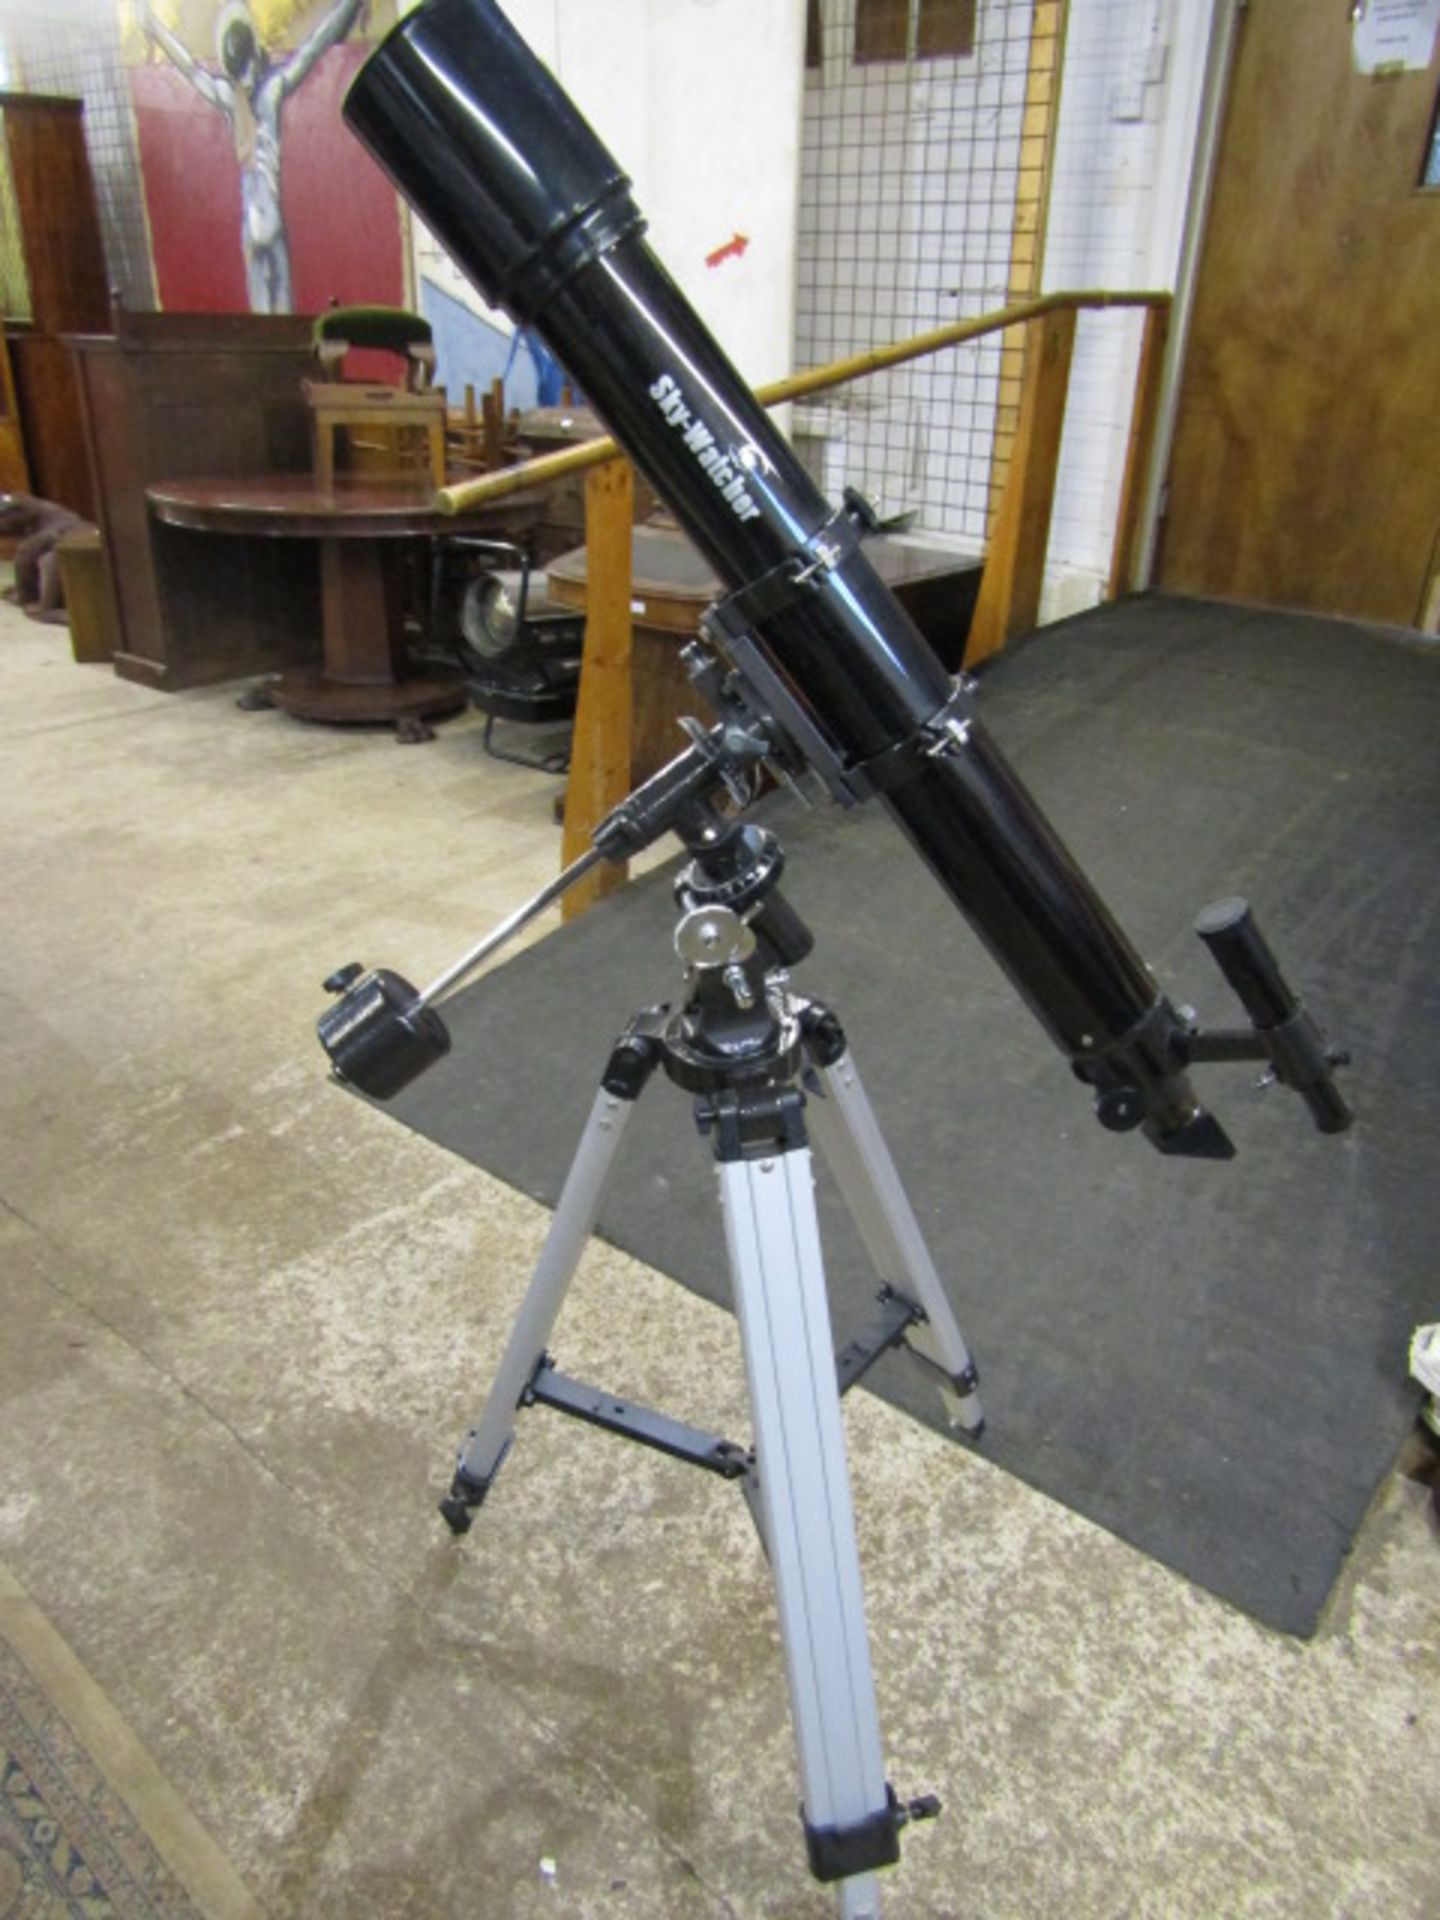 New and unused Sky Walker telescope with stand, box of lenses, book and a canvas cover